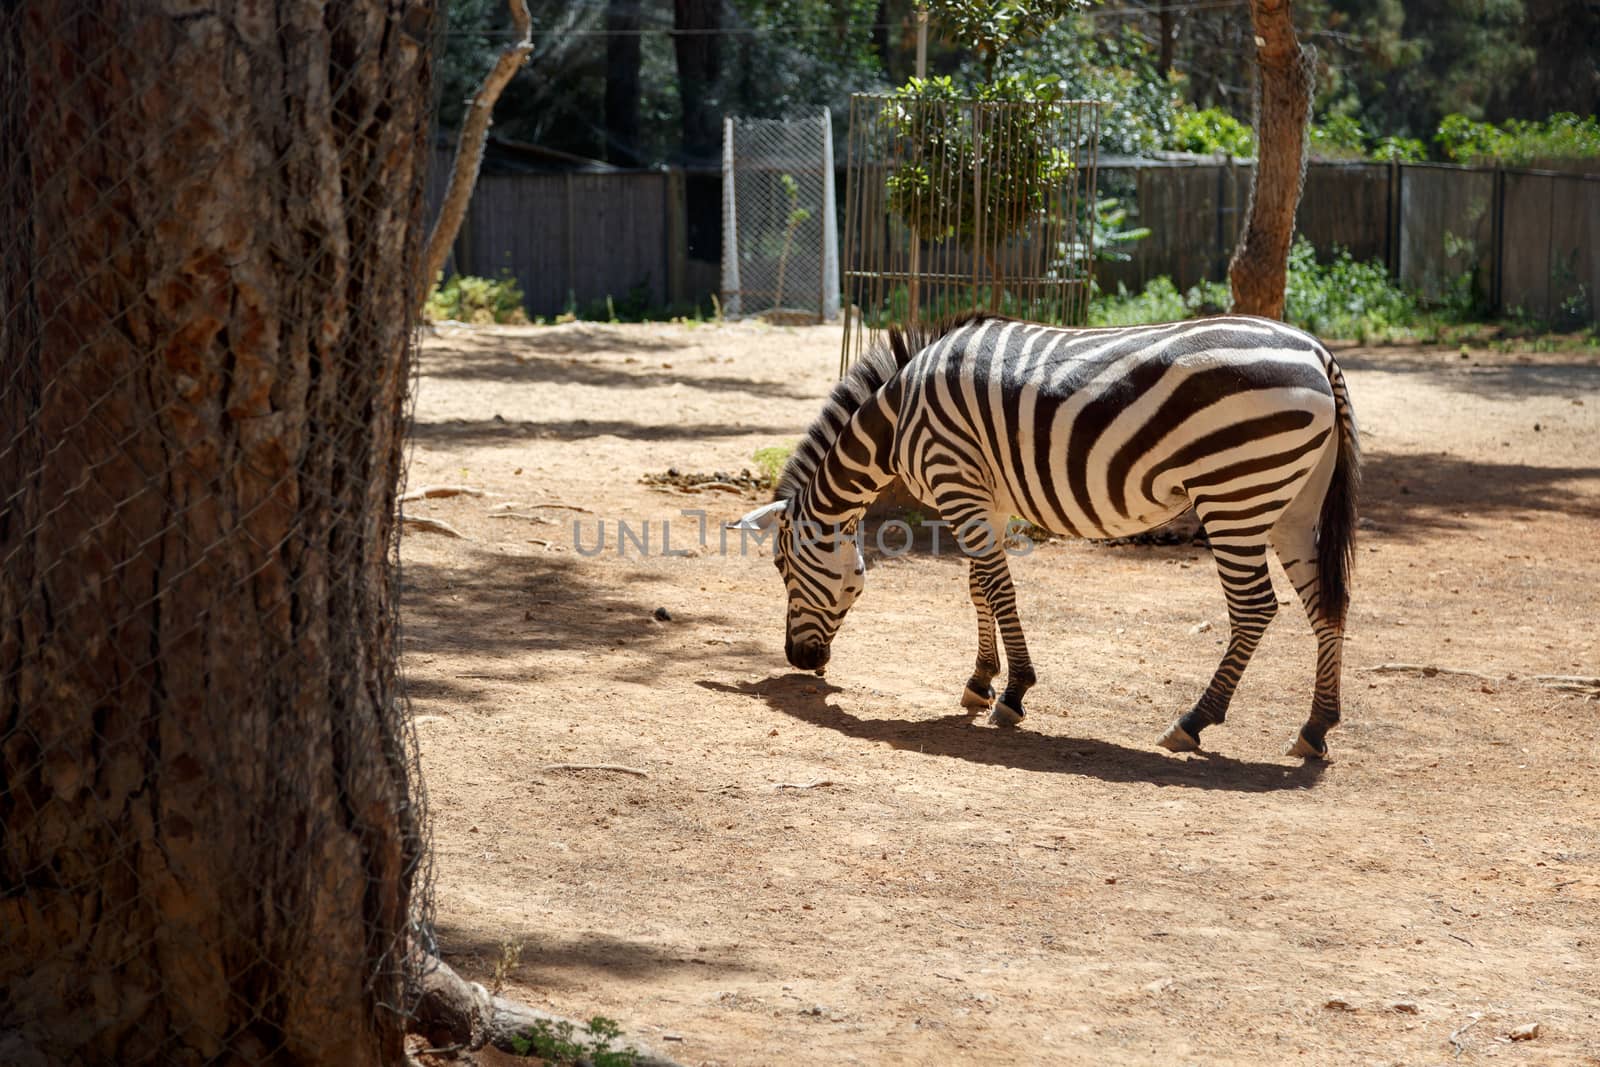 View of a stripped zebra living in cage in a natural park.